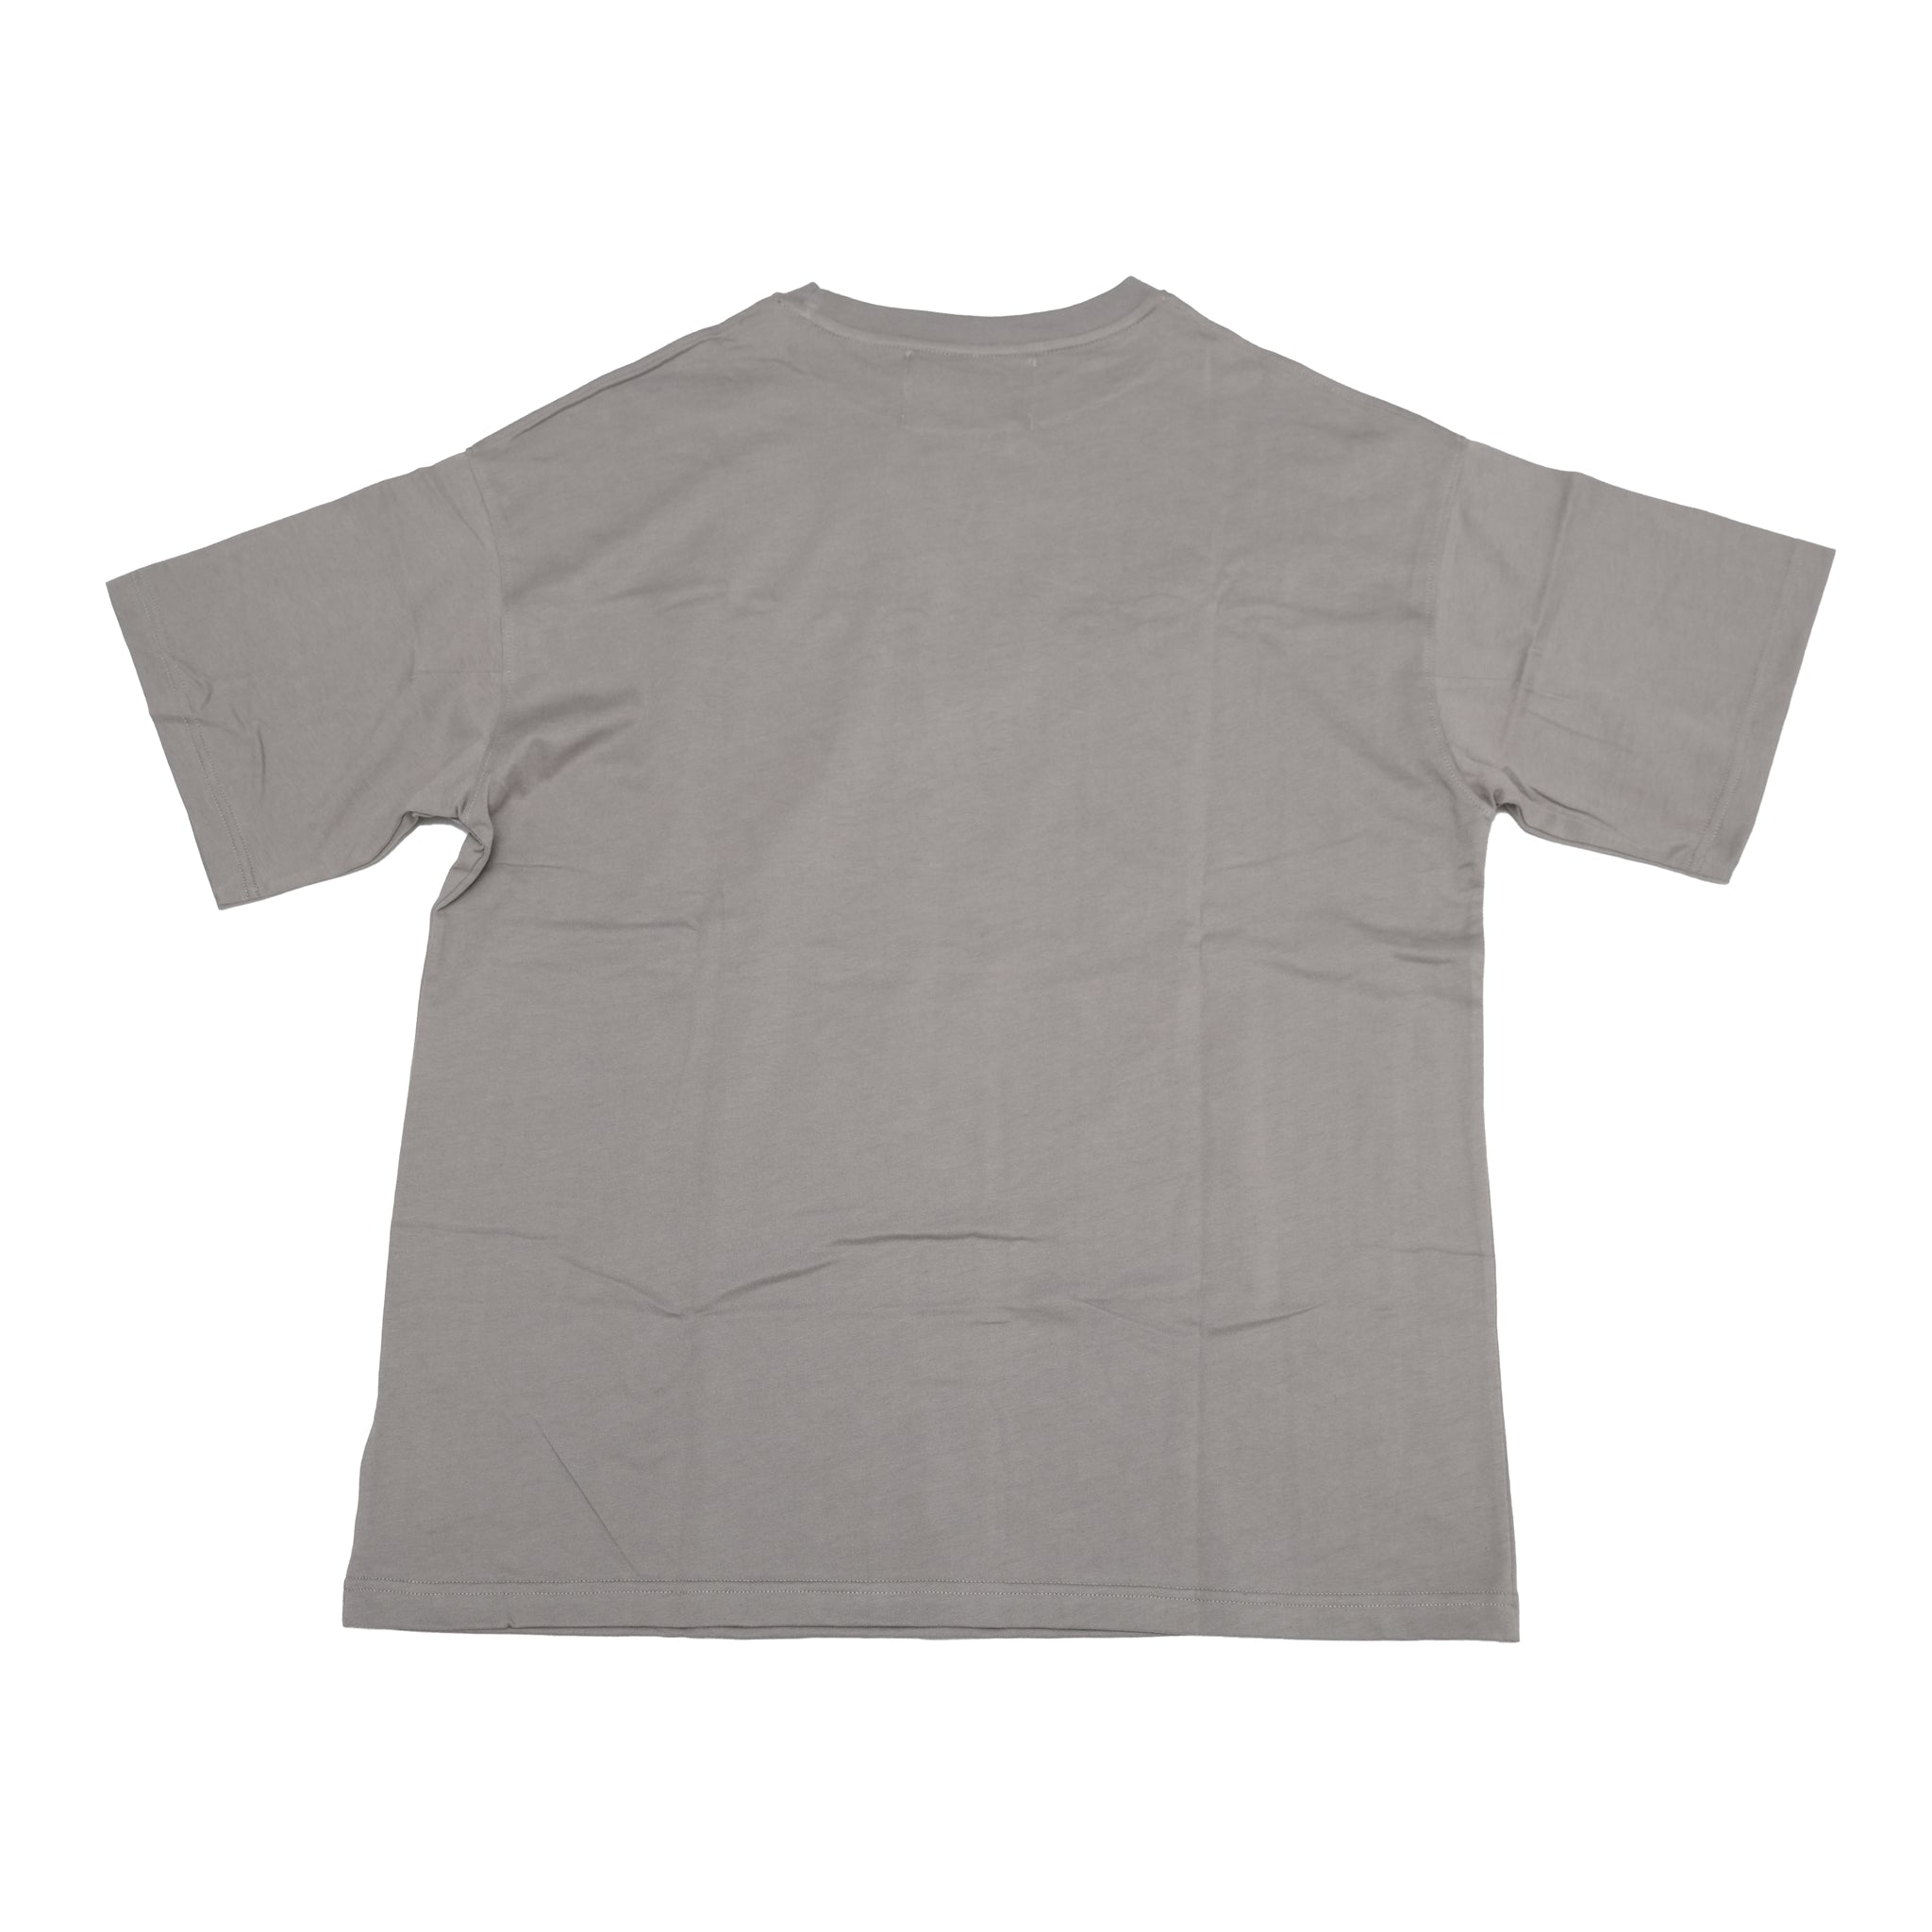 No:SNA22-SP-T02 Name:Seivson 2022 ‘’ LIFE GOES ON ’’ 5週年限定 T-SHIRT | Color:Gray |  Size:FREE【(A)crypsis_エイクライプシス】【SEIVSON_セイヴソン】